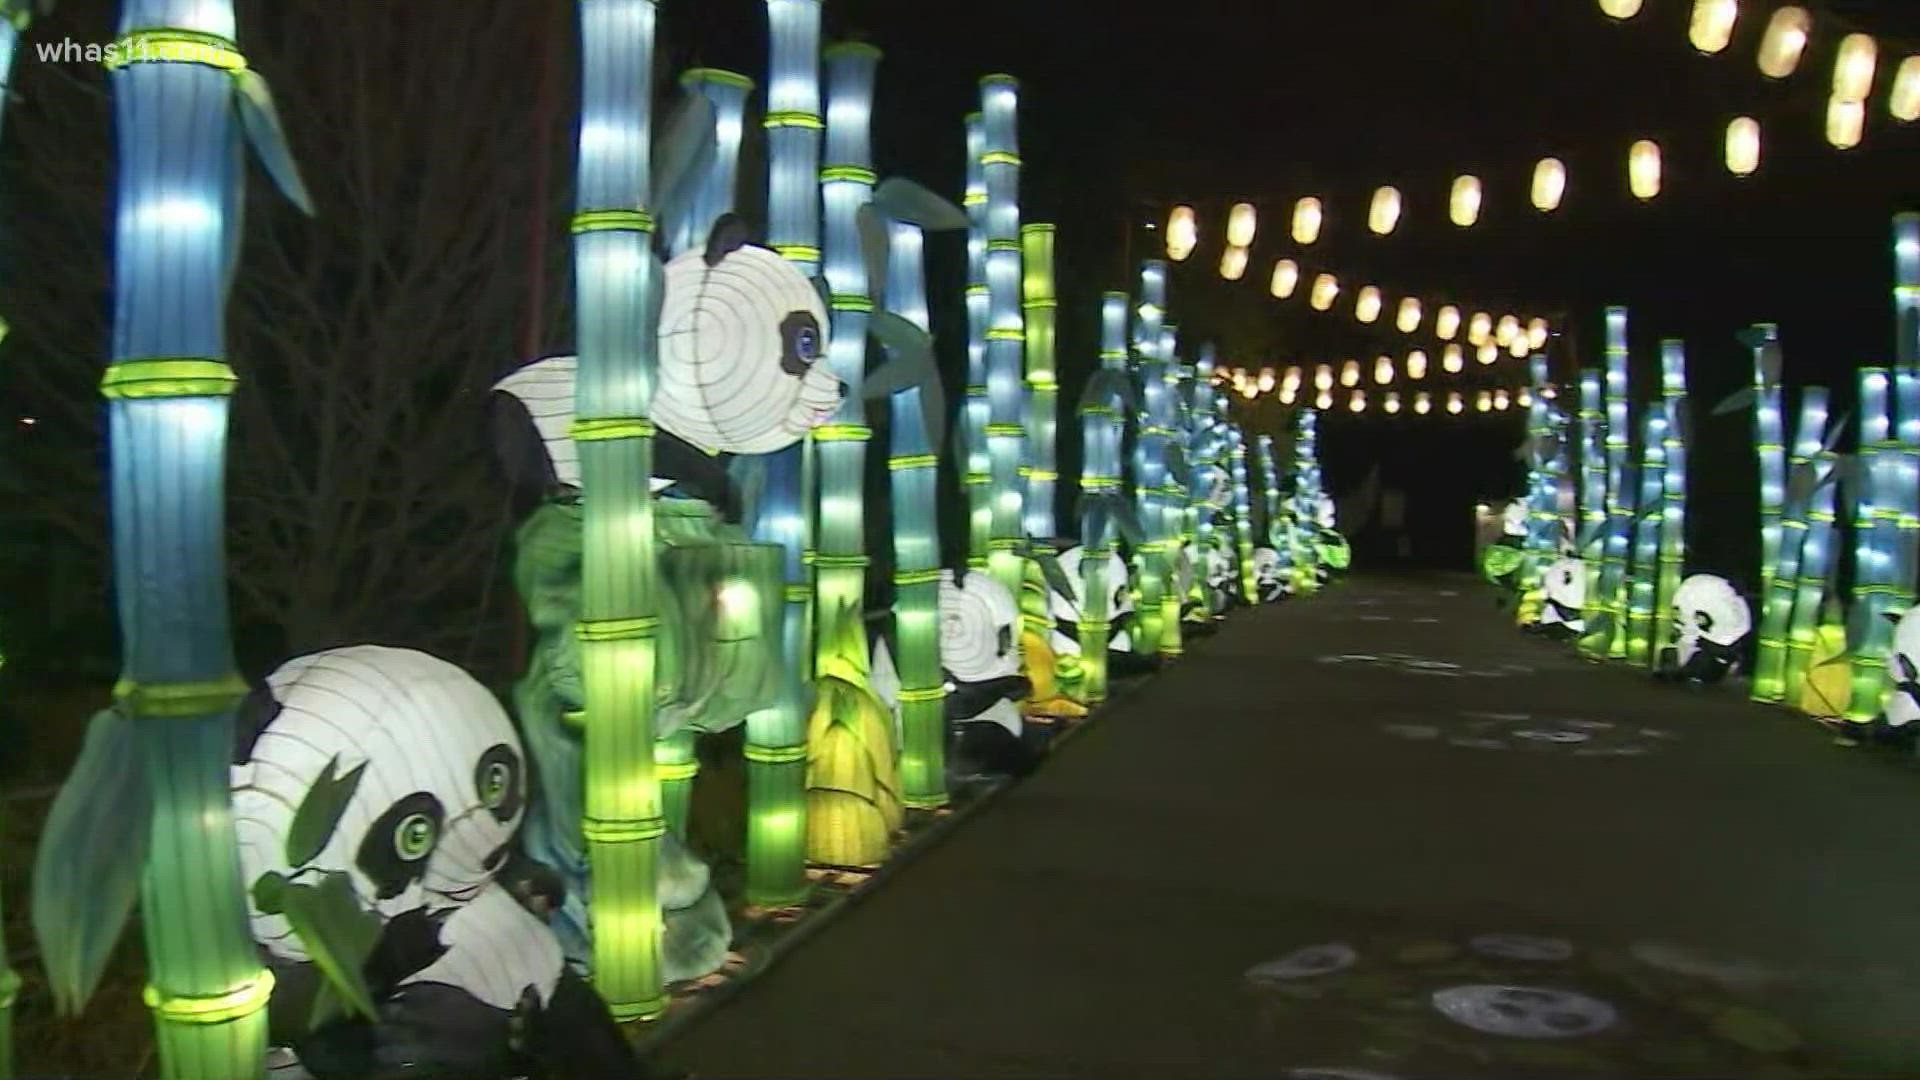 The Wild Lights festival has over 50,000 lights throughout the 1.4-mile stroll. This panda path is lit with bamboo, adult and baby pandas, and traditional lanterns.